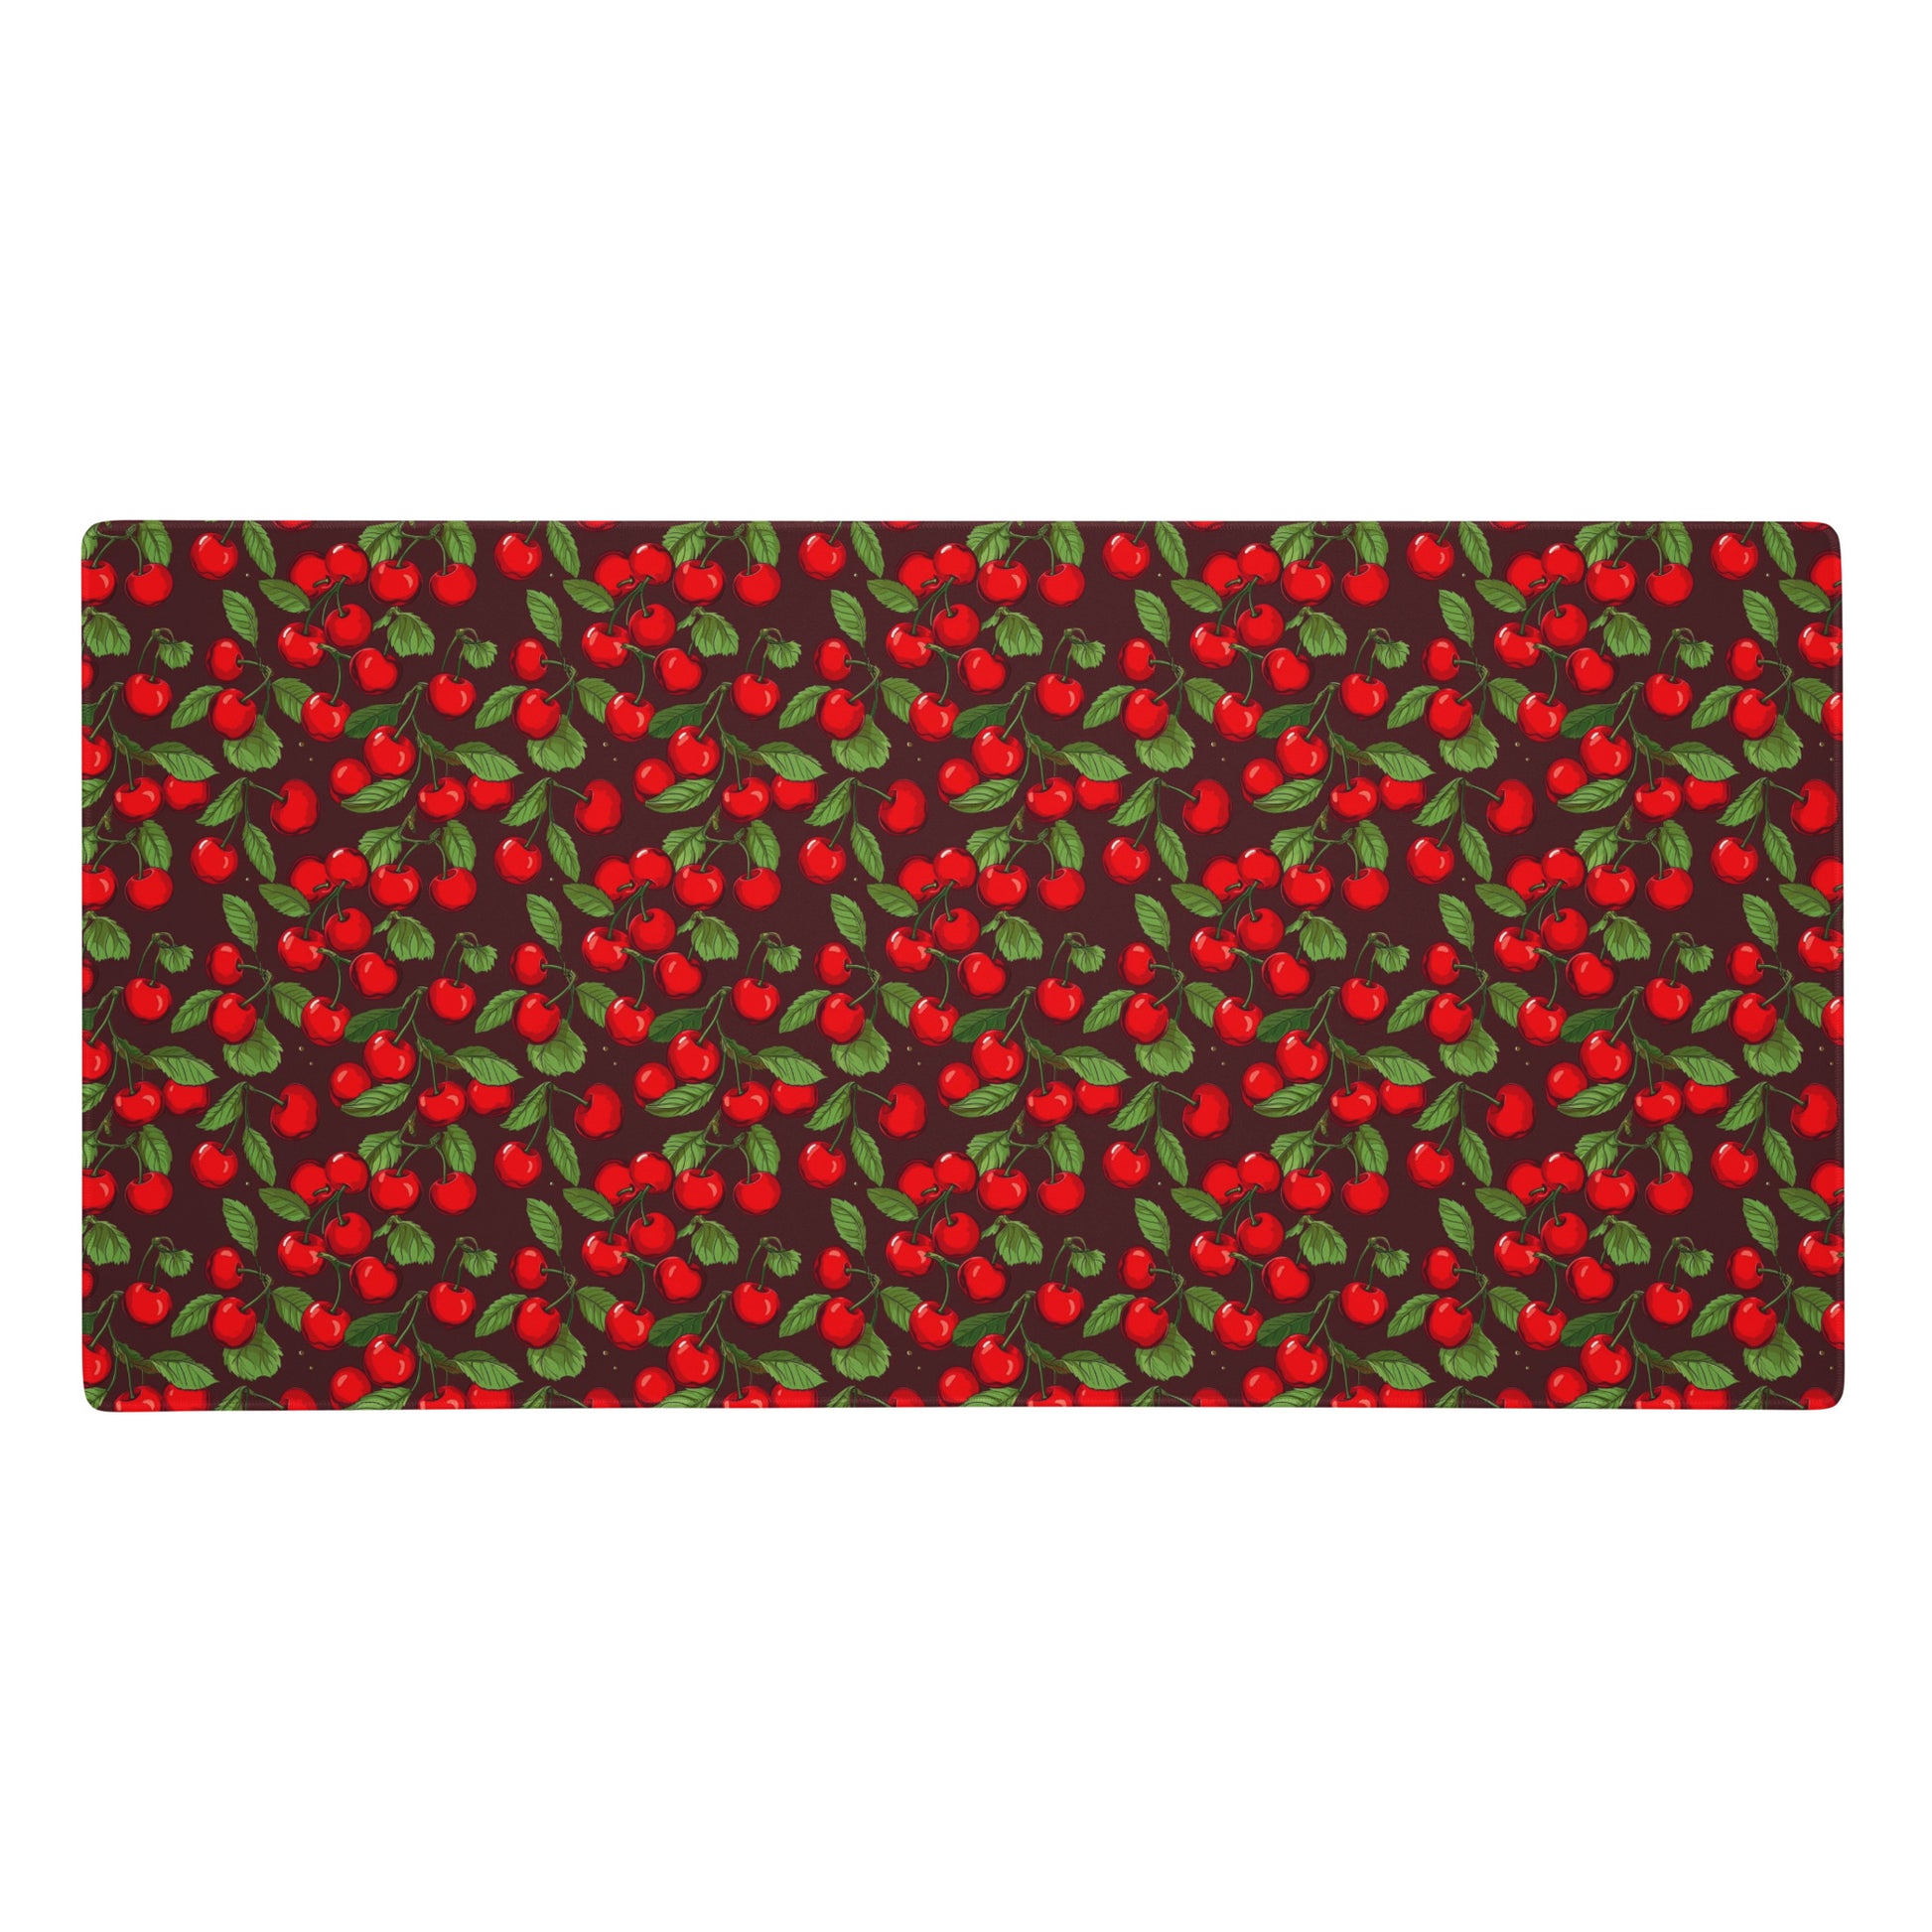 A 36" x 18" desk pad with cherries all over it. Red in color.